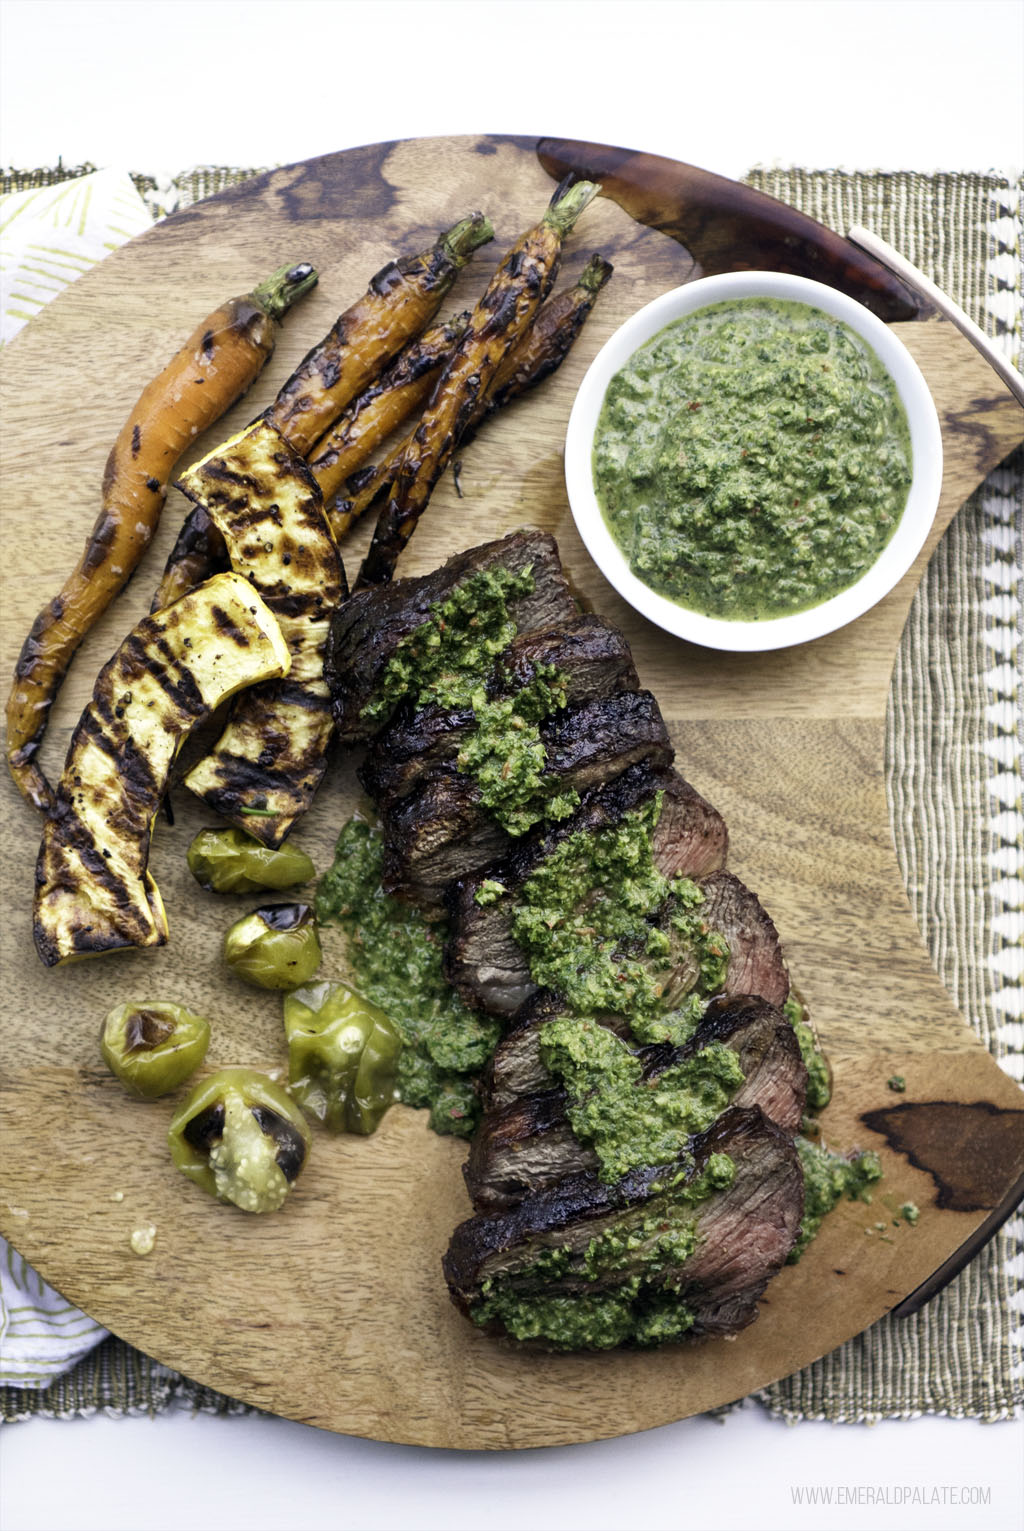 carrot greens chimichurri over steak and grilled veggies